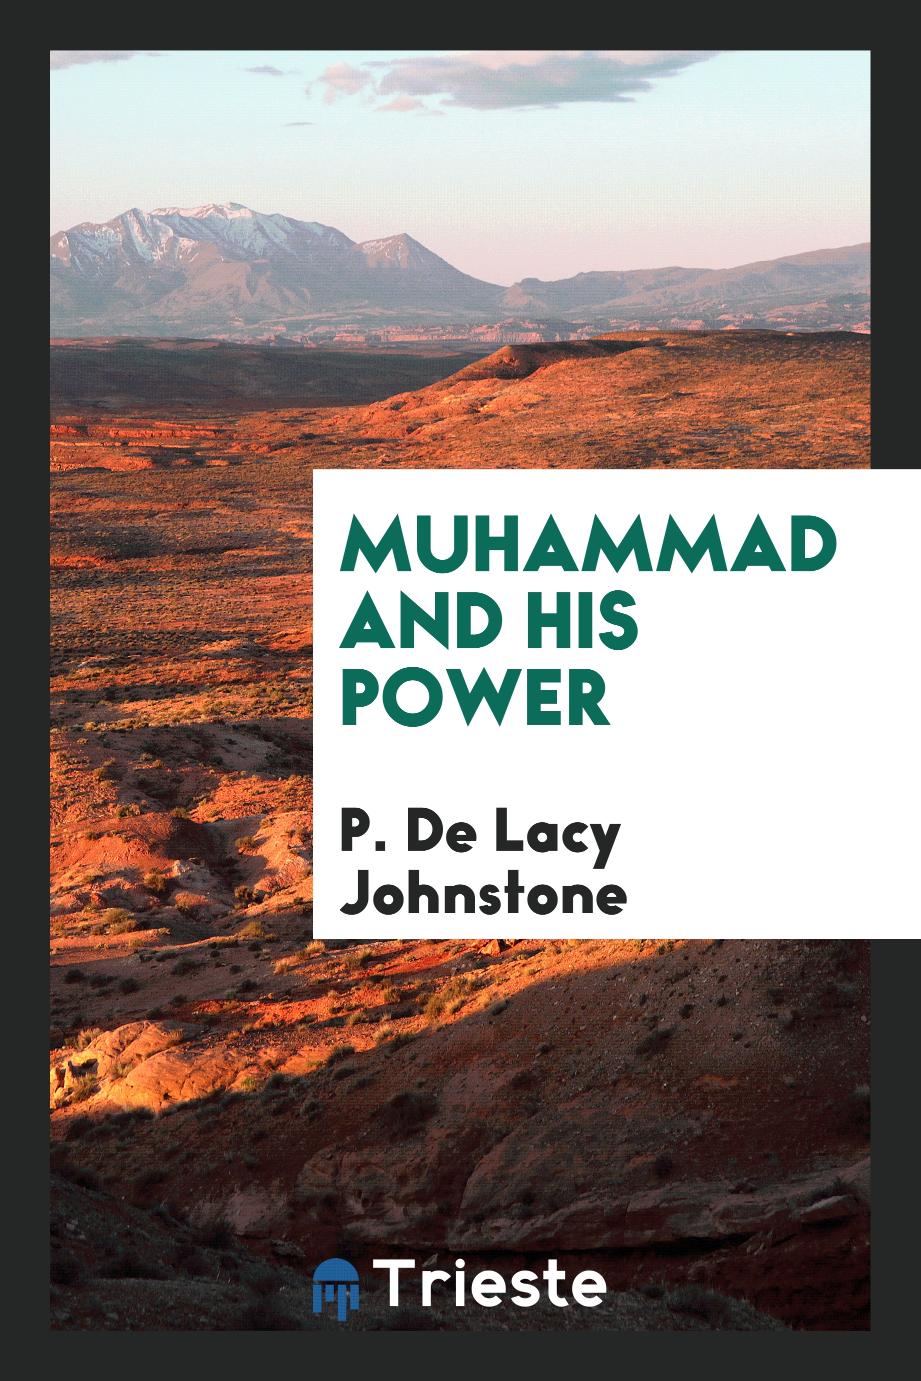 Muhammad and his power